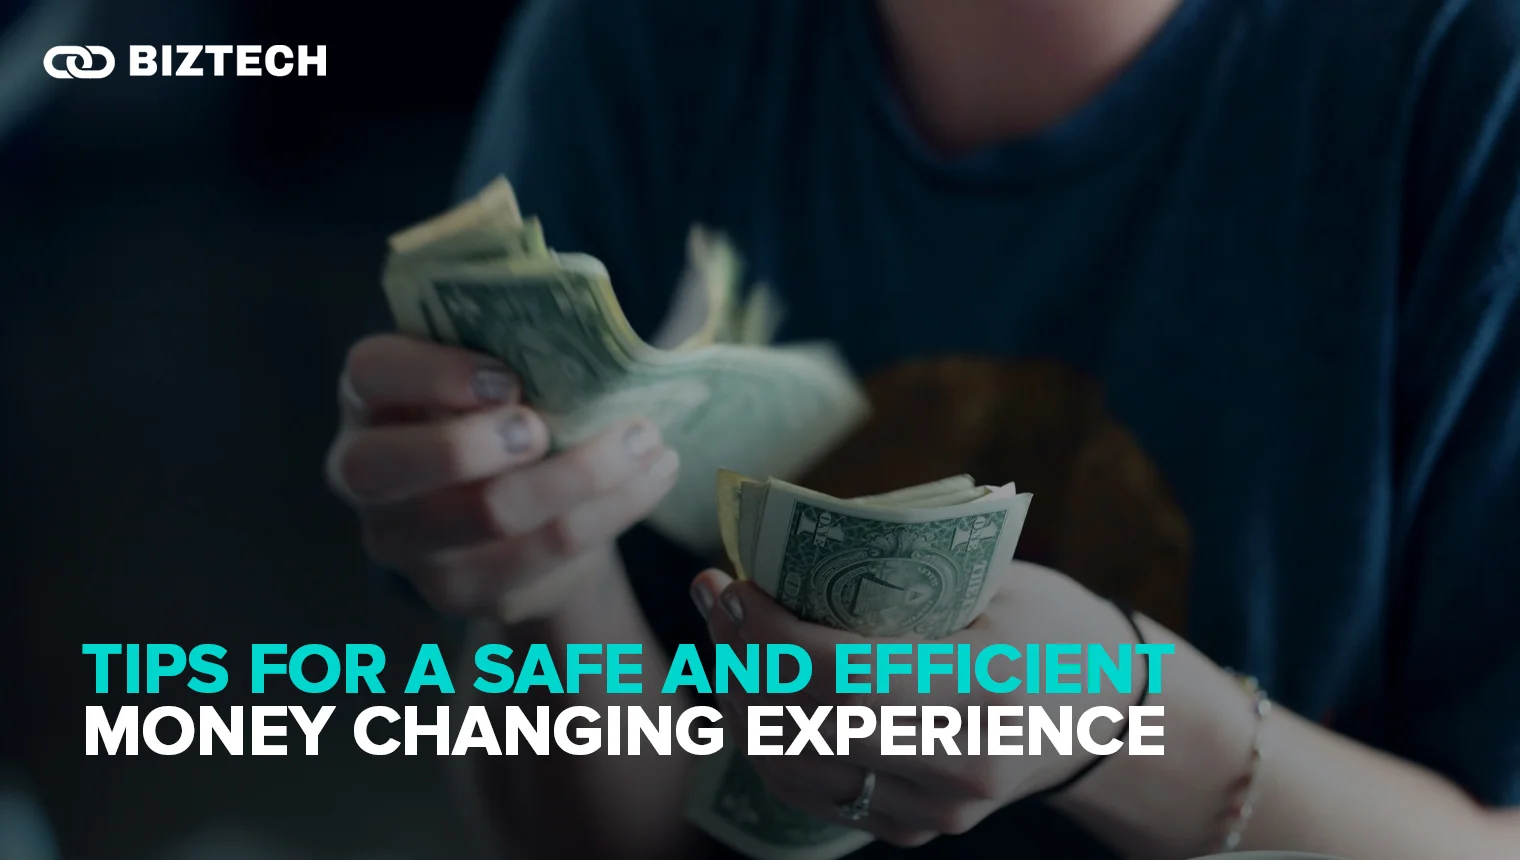 Tips for a Safe and Efficient Money Changing Experience